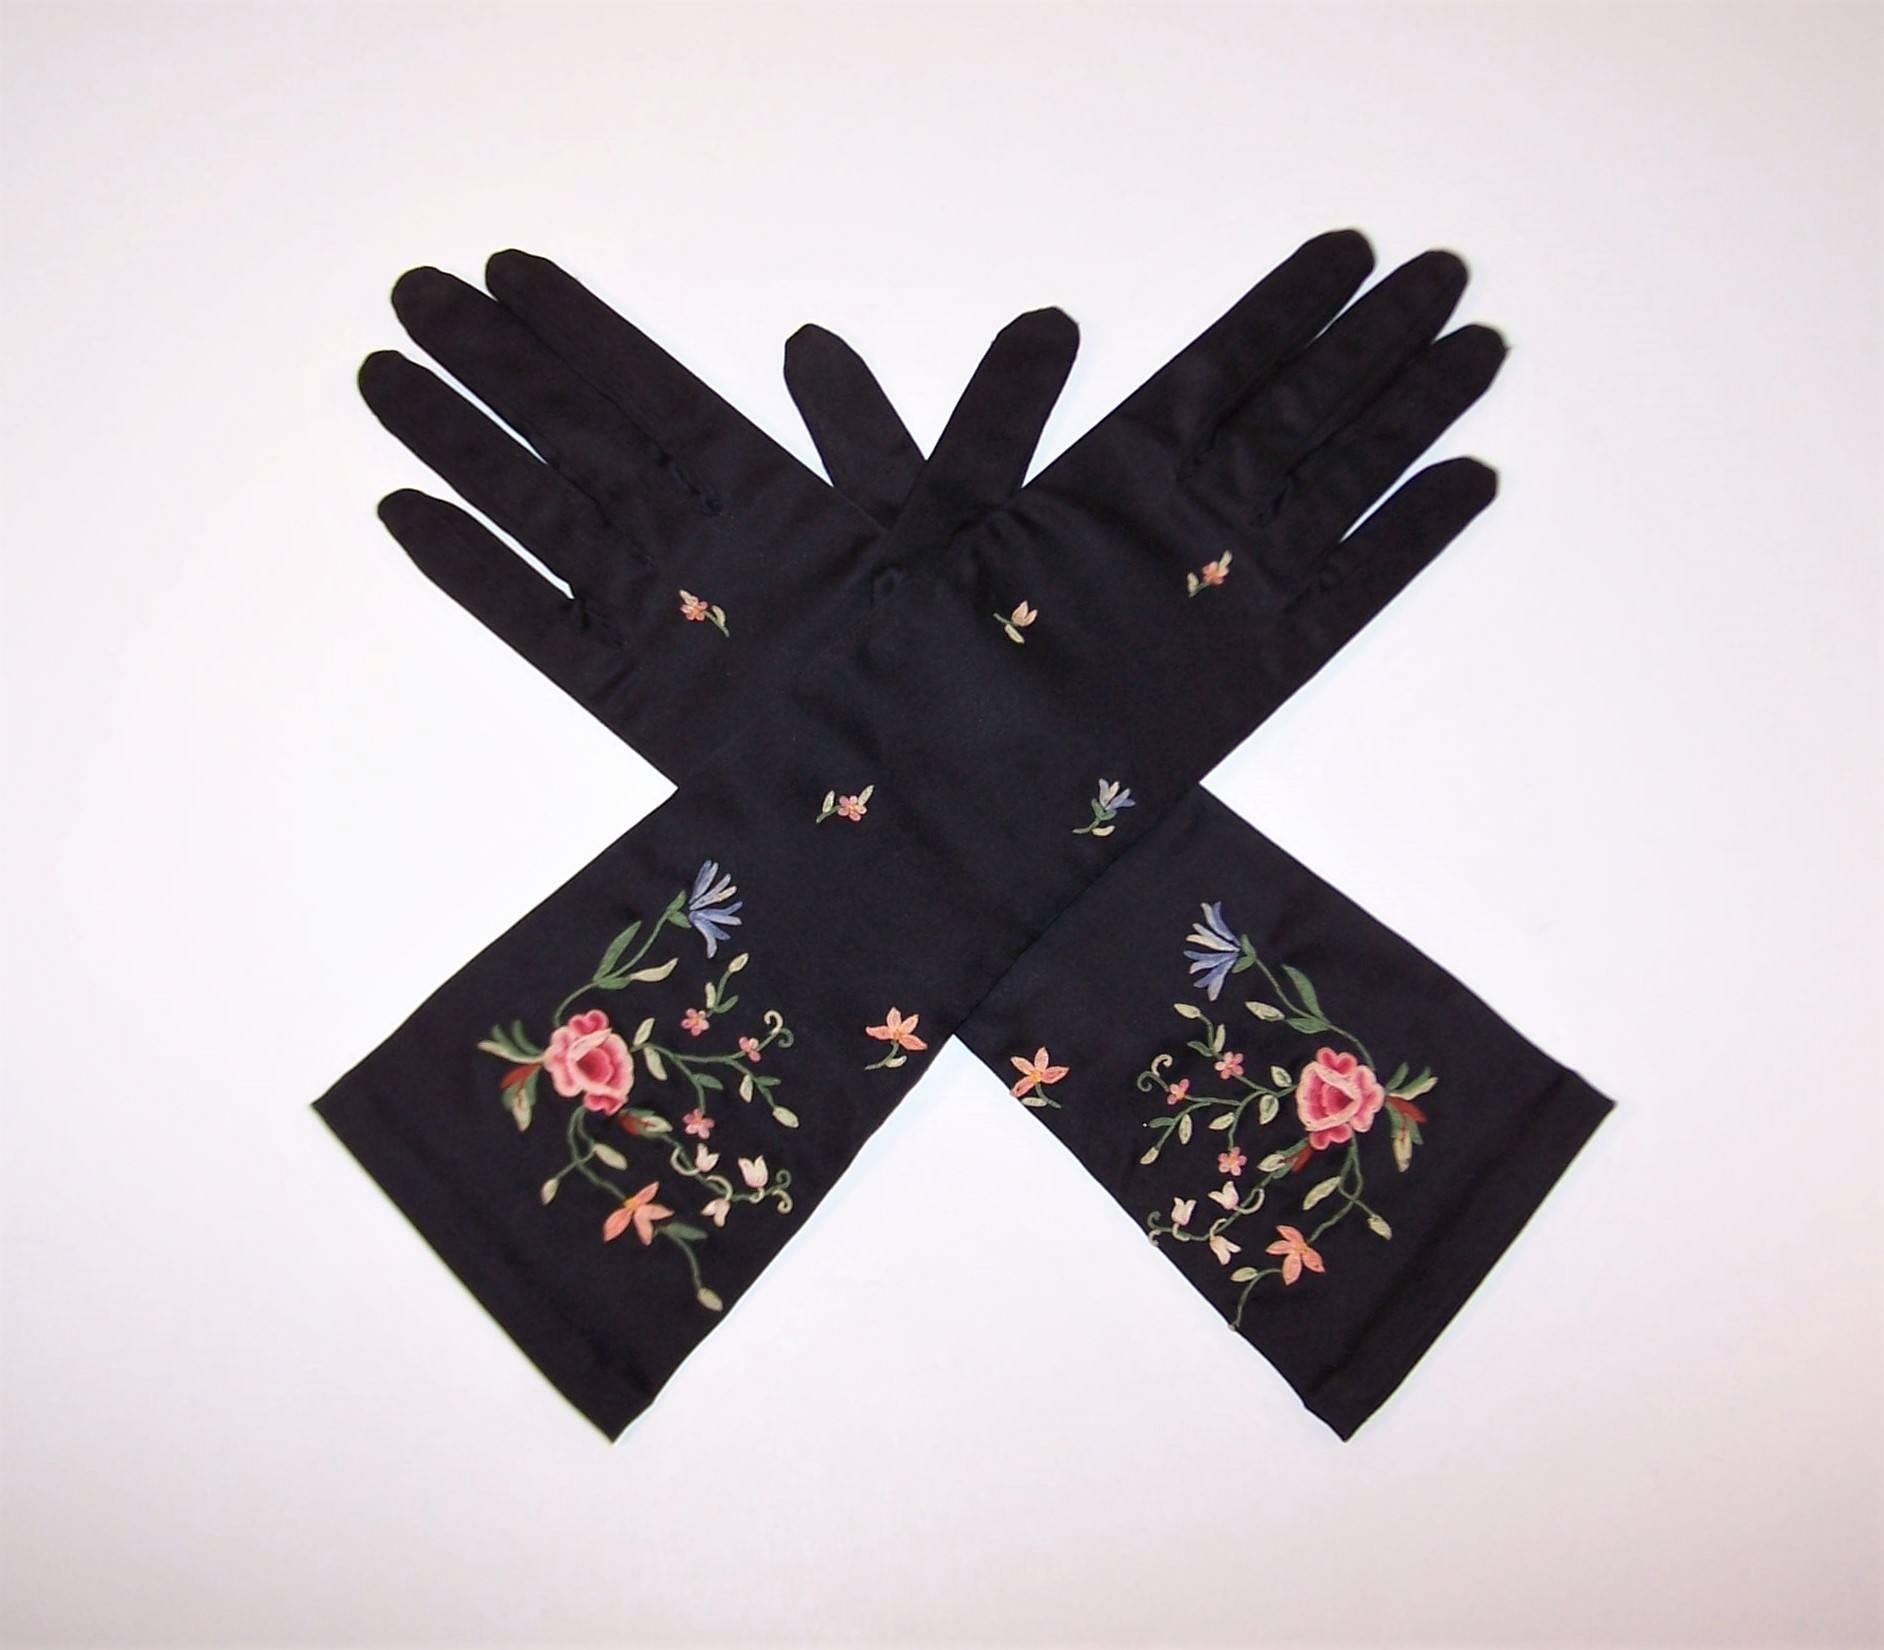 A beautiful pair of gloves is the ultimate in glamour, elegance and style.  These 1950's black stretch satin gloves are 3/4 length with chain stitch floral embroidery in shades of pink, green and blue.  They appear rarely worn though there are some